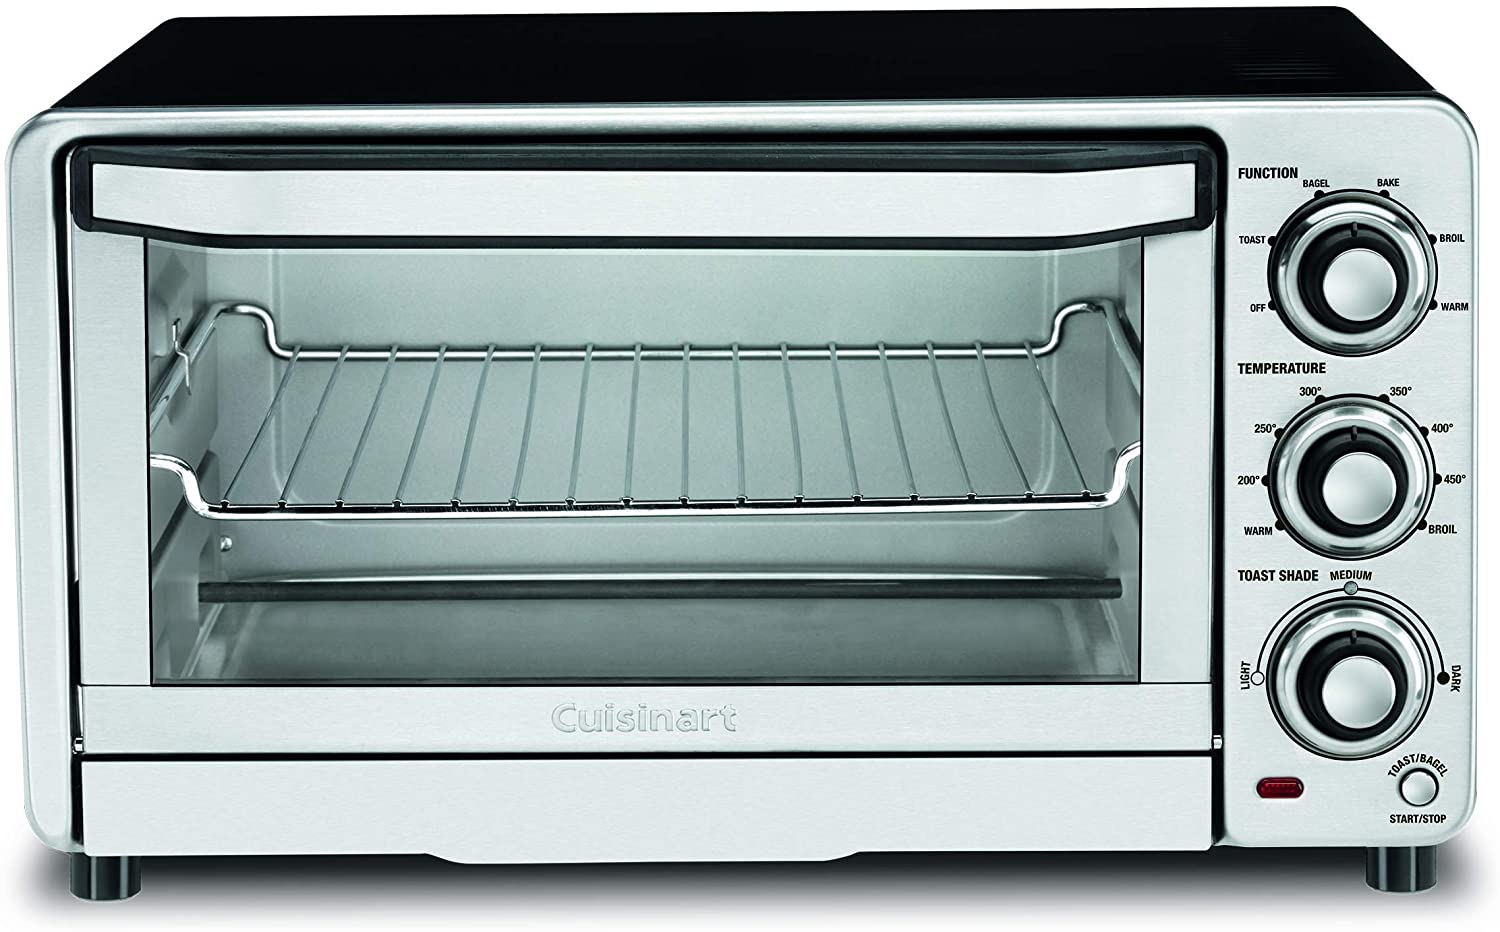 Best Small Toaster Oven 2021- Reviews and Buying Guide